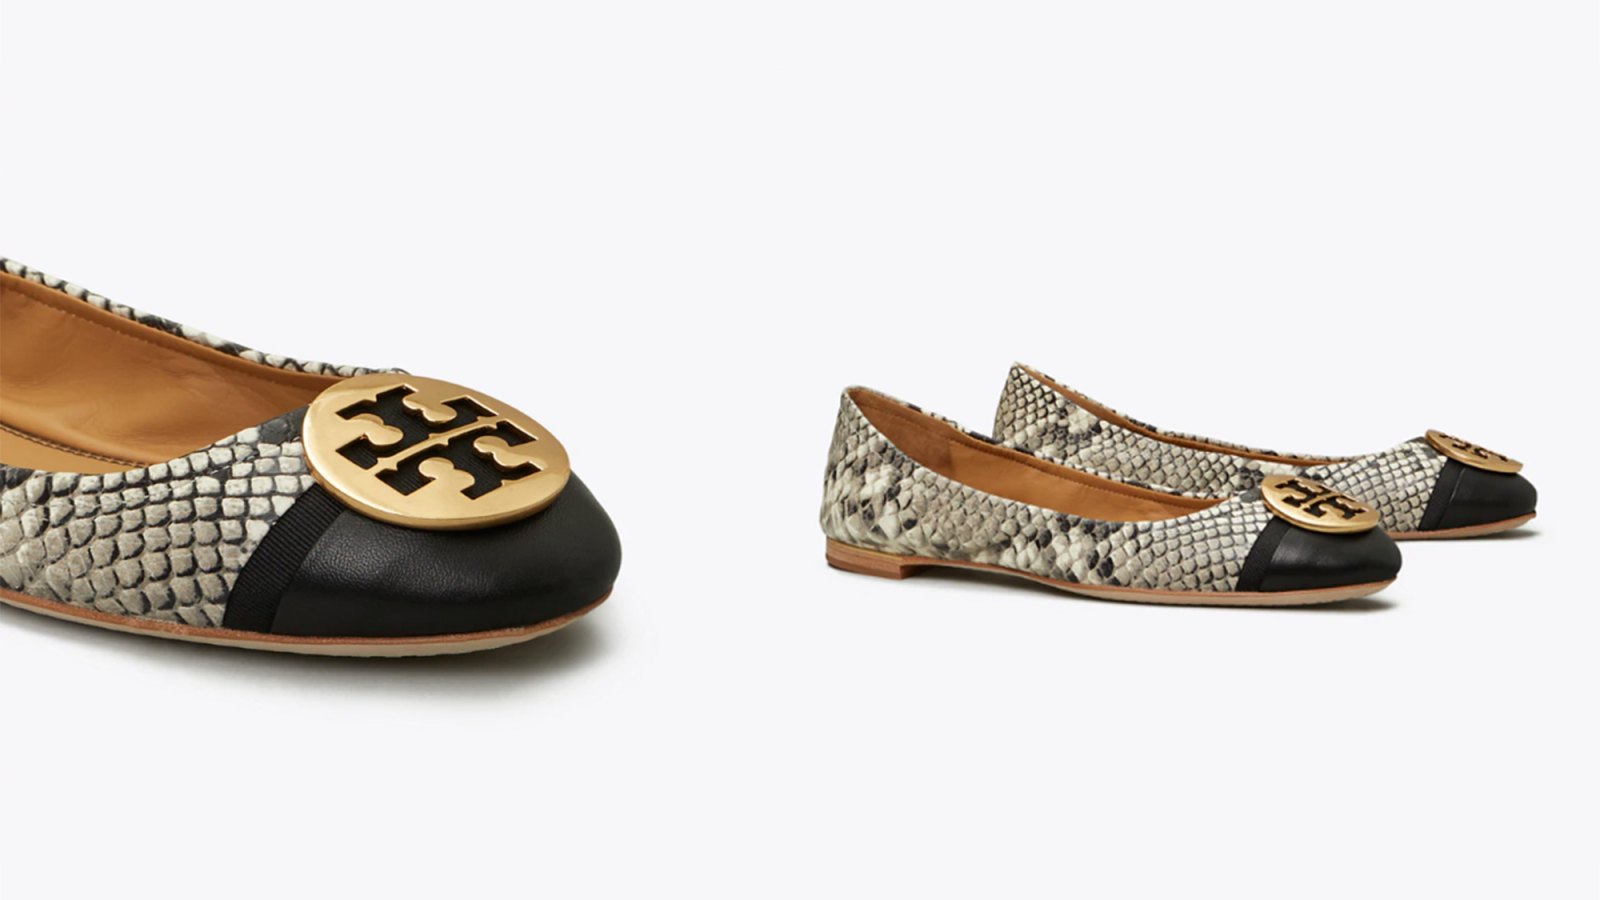 Tory Burch Shoes Are an Elevated Take on the Classic Flat